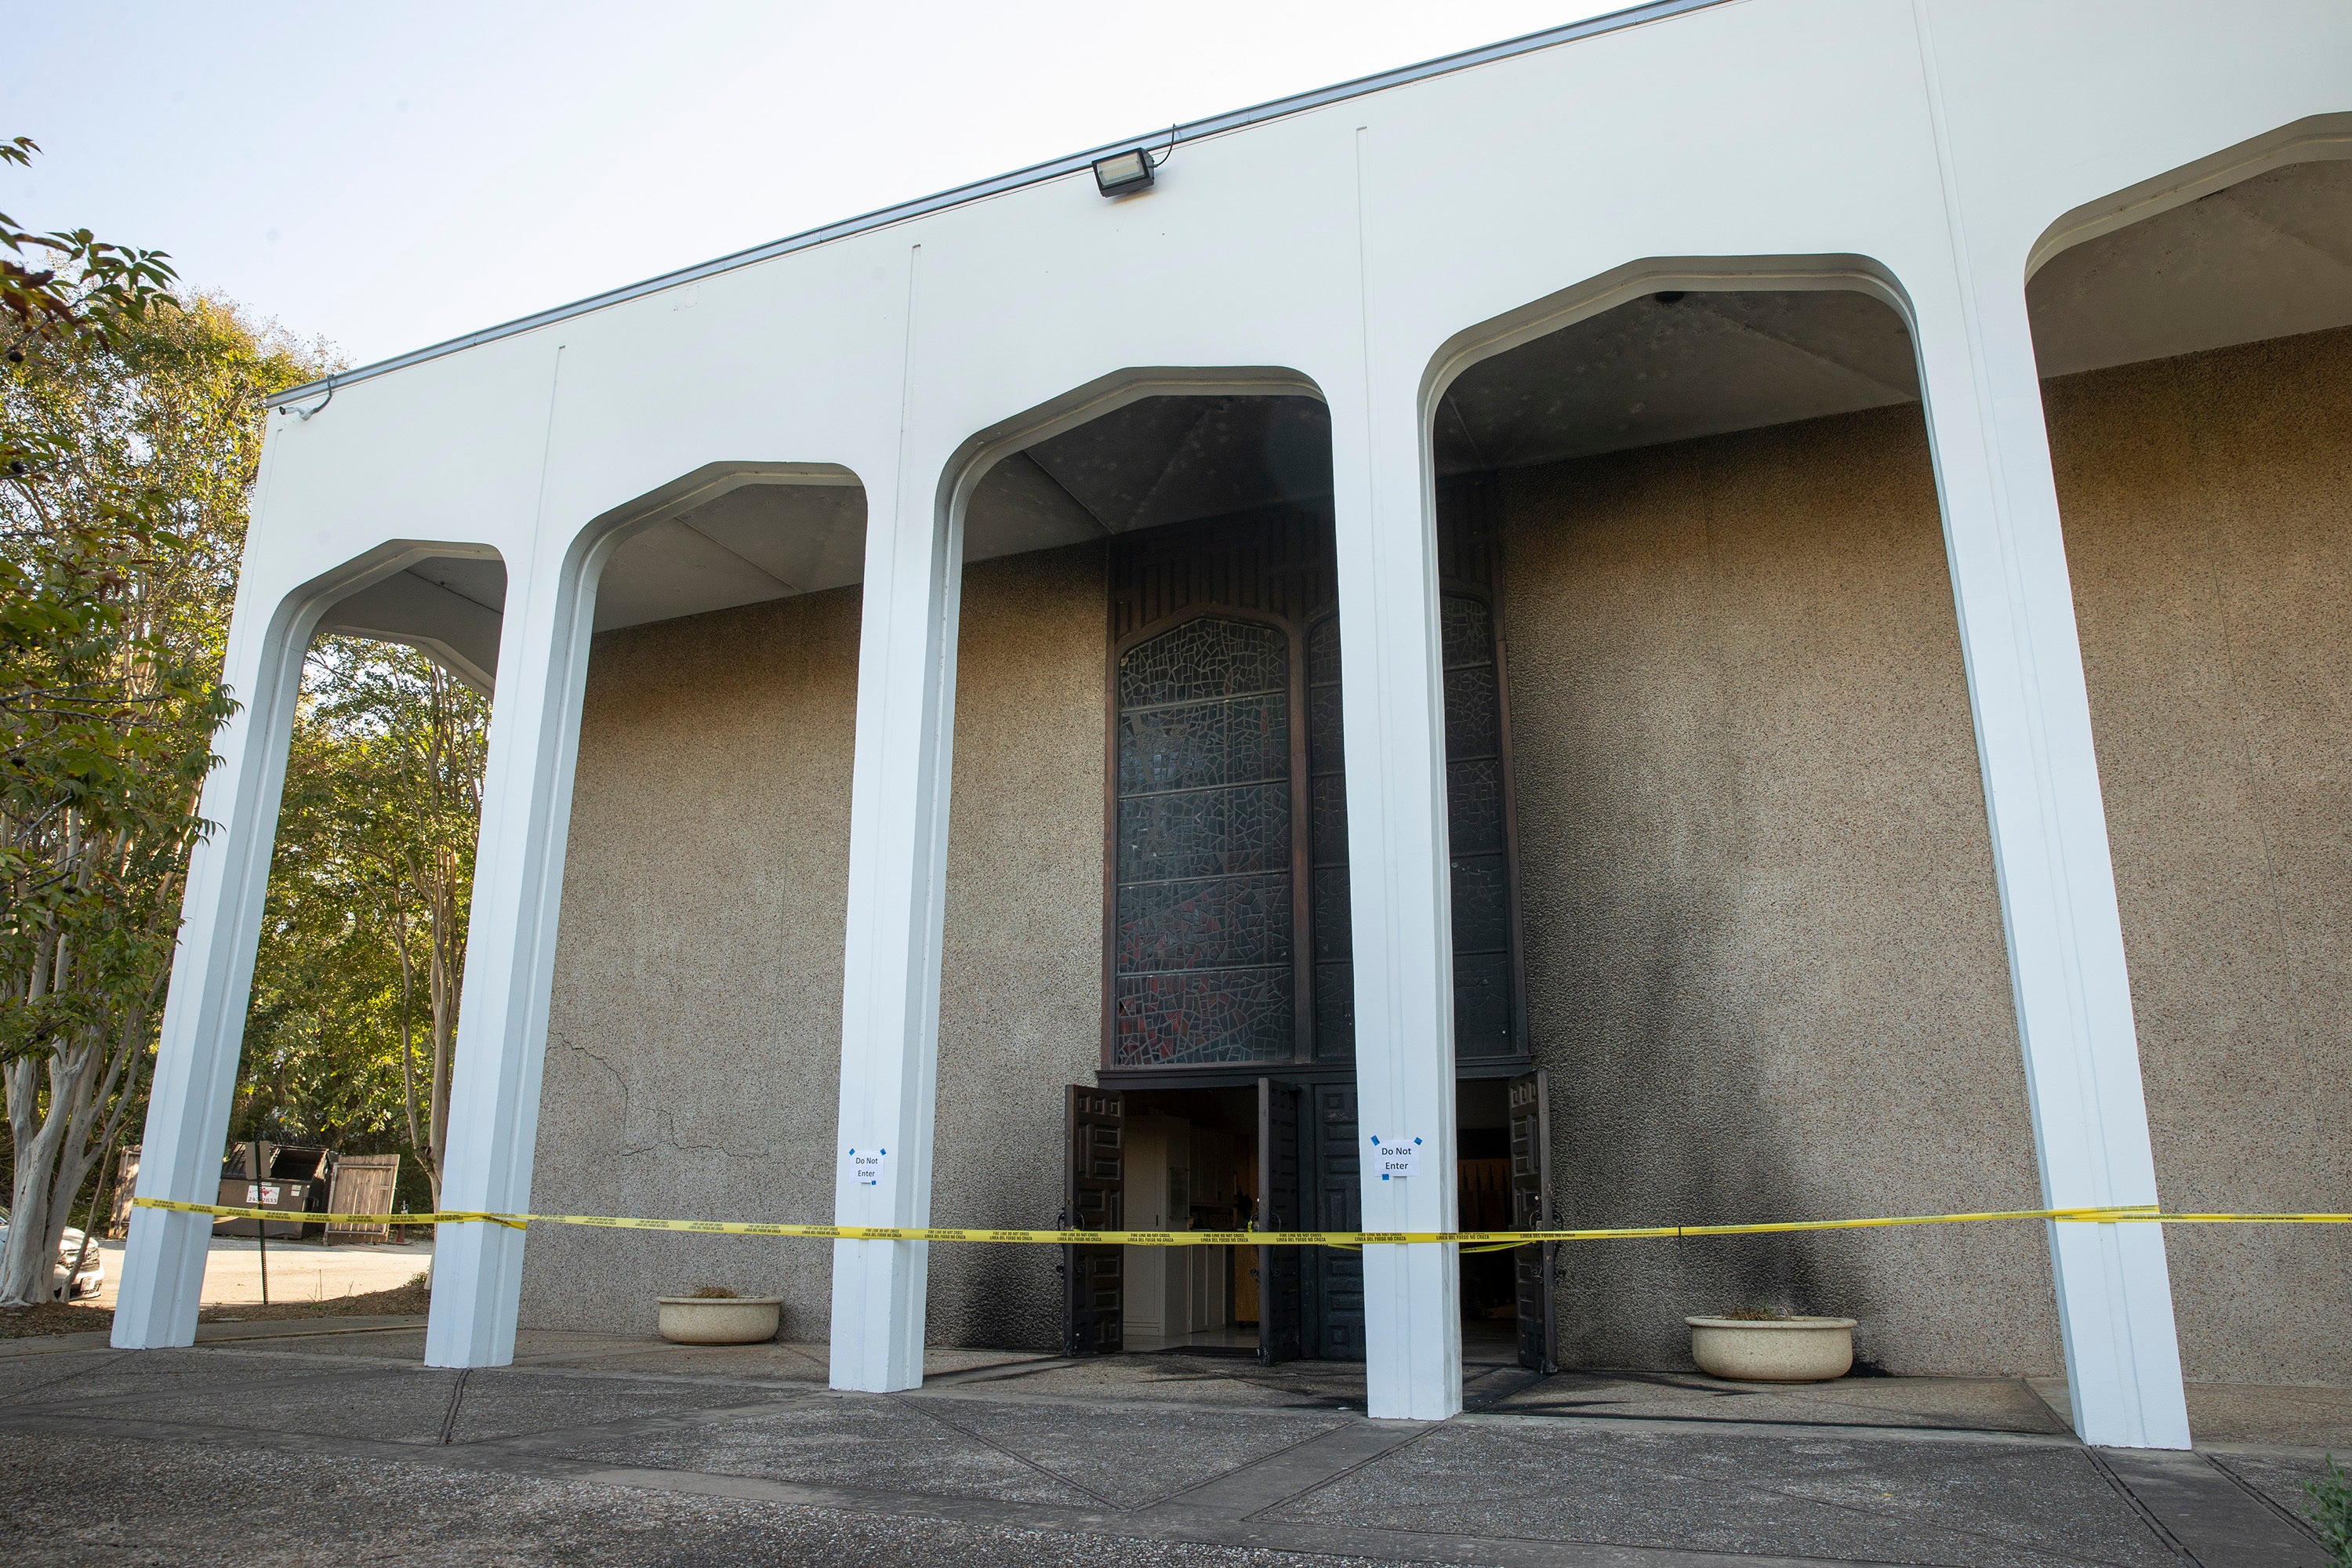 Caution tape marks the front doors at Congregation Beth Israel on 1 November 2021, after fire at the synagogue in Austin, Texas, the previous day.